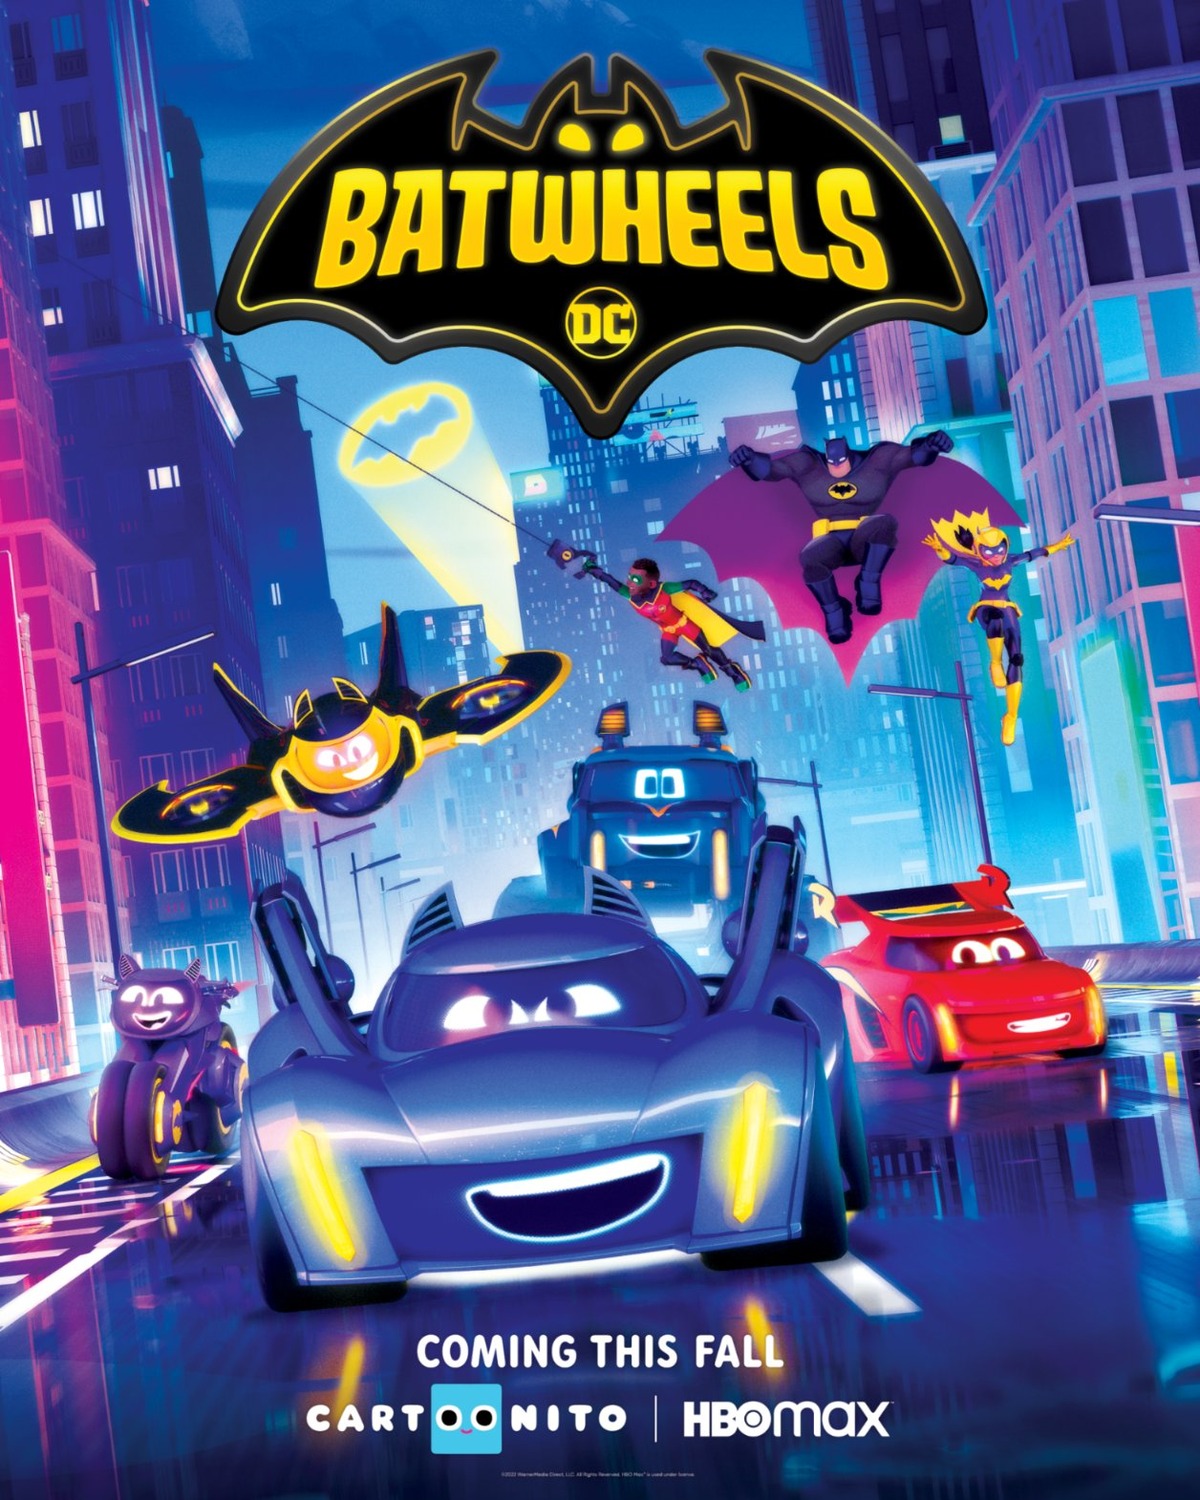 Extra Large TV Poster Image for Batwheels (#1 of 3)